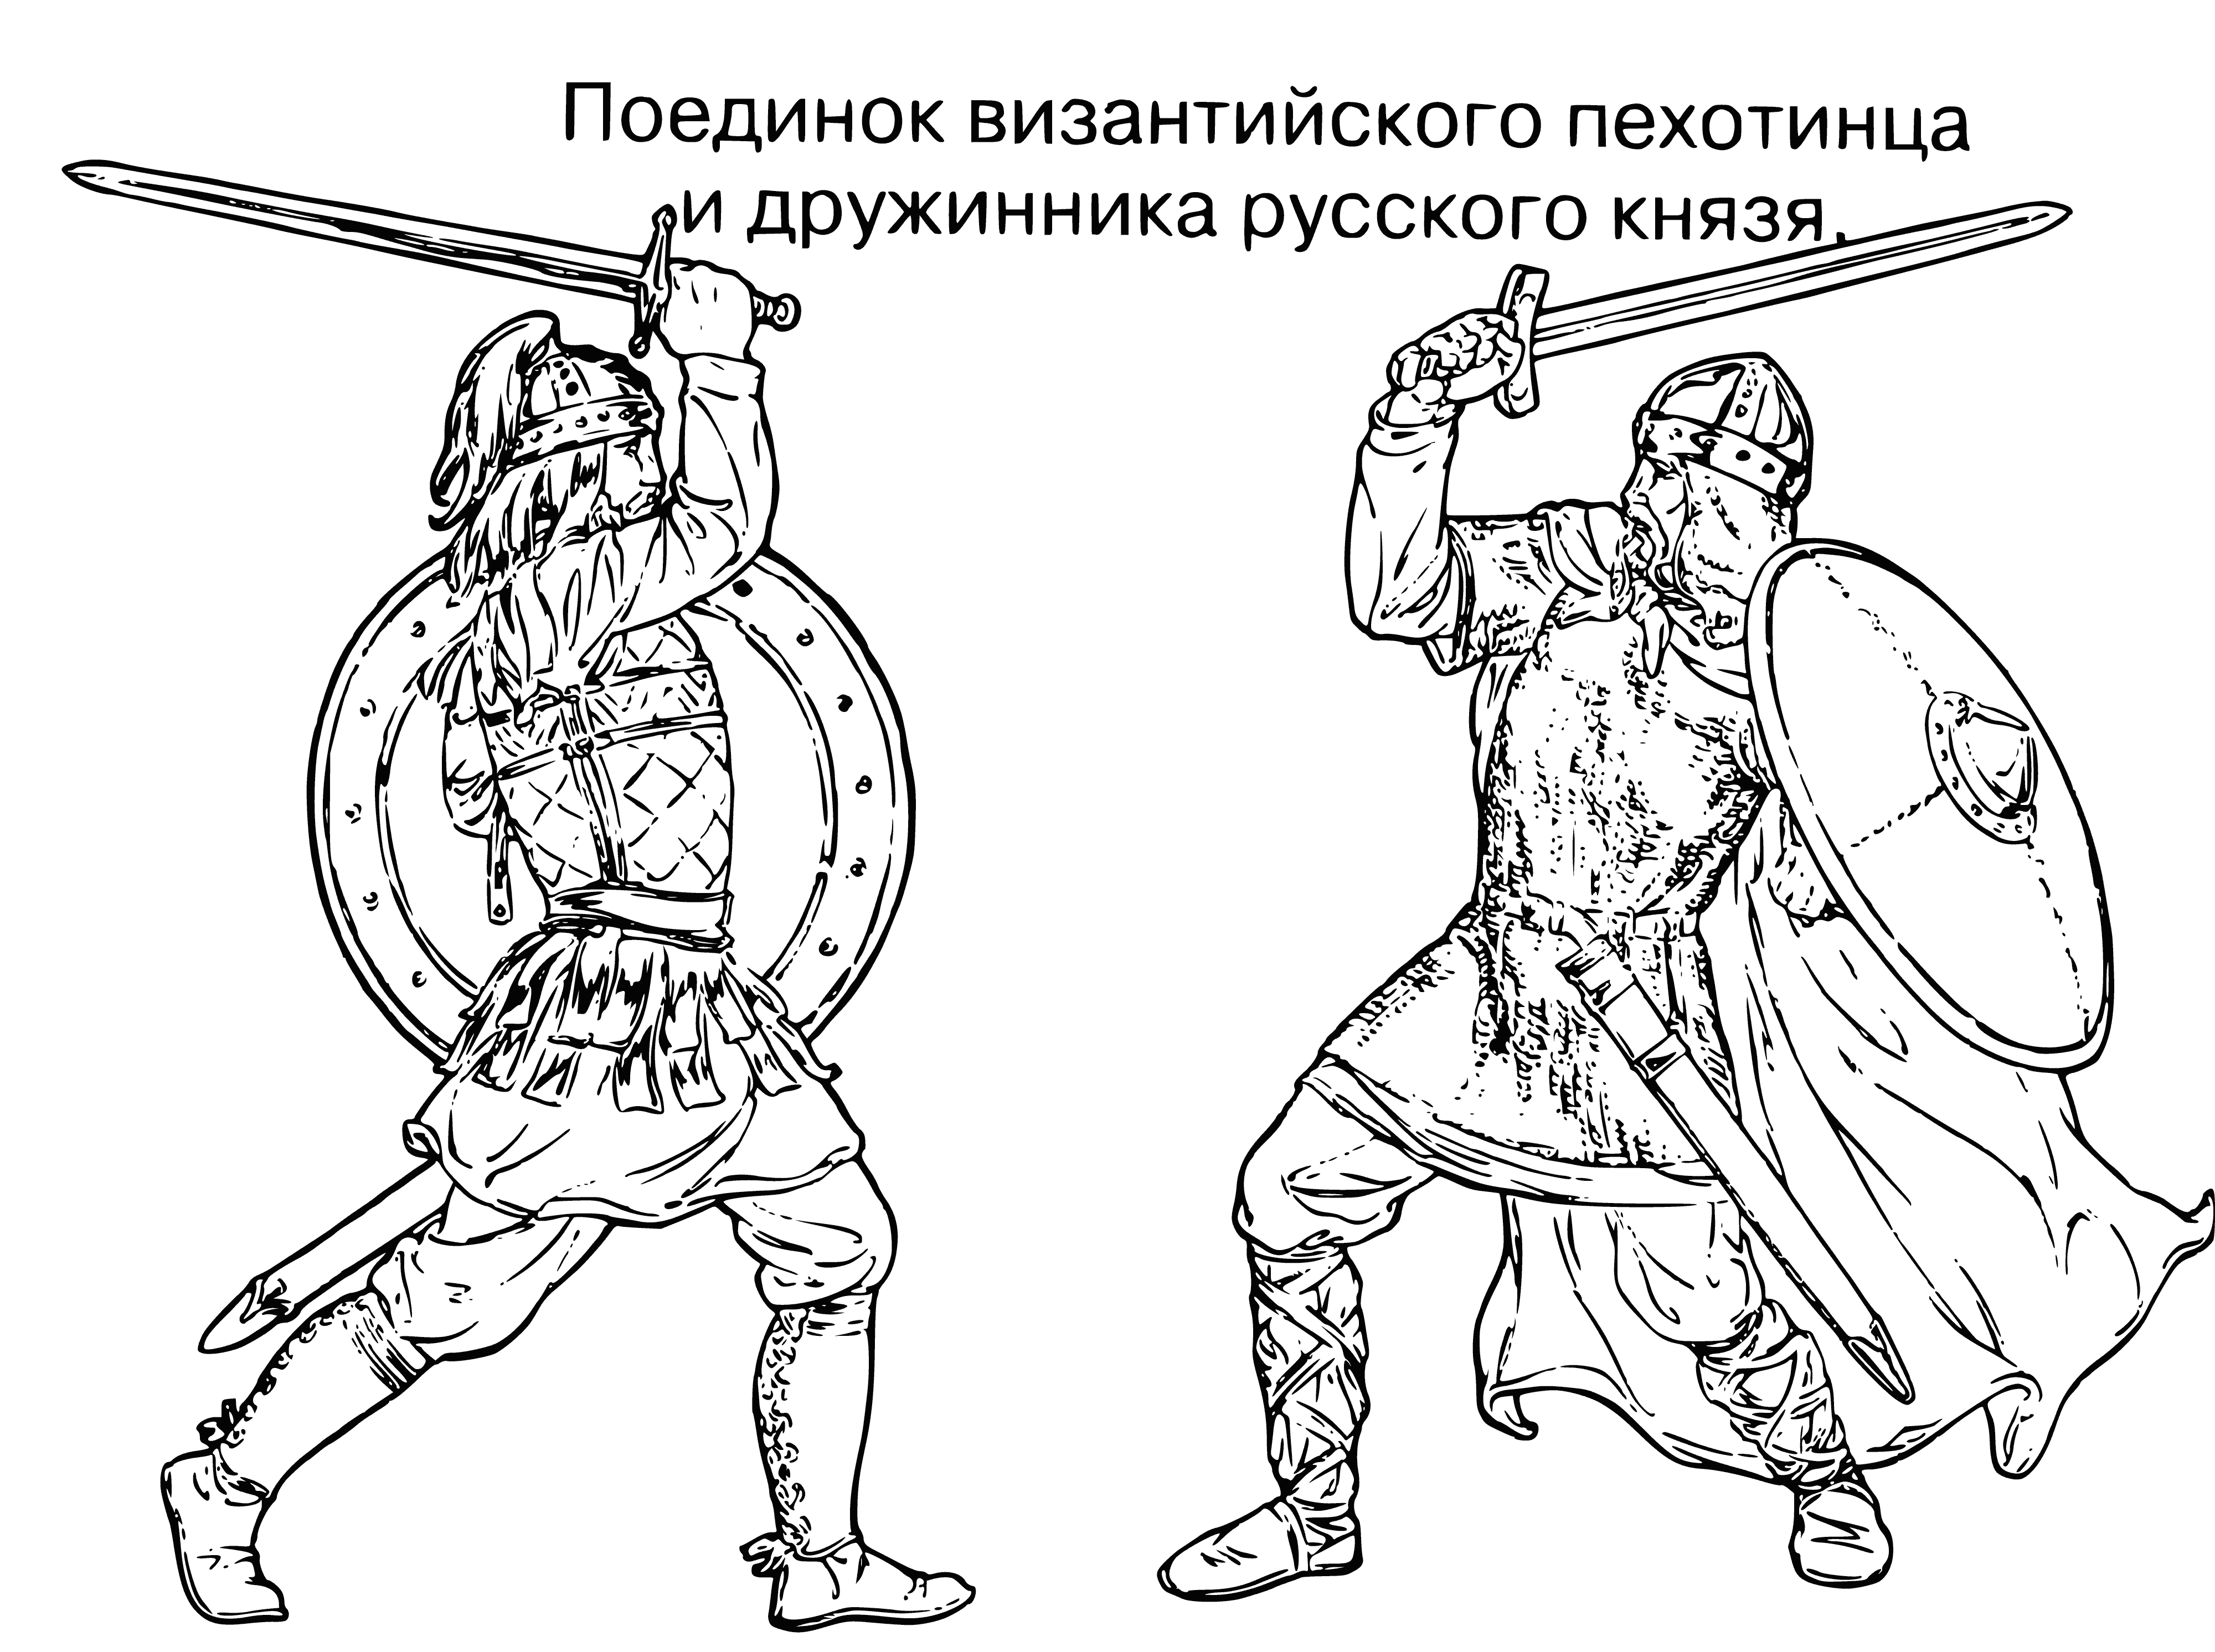 coloring page: Two warriors duel in a dense atmosphere of tension, each wielding swords and shields. One breaks through the other's defense, raising his sword in victory. #battlefield #swordfight #tension